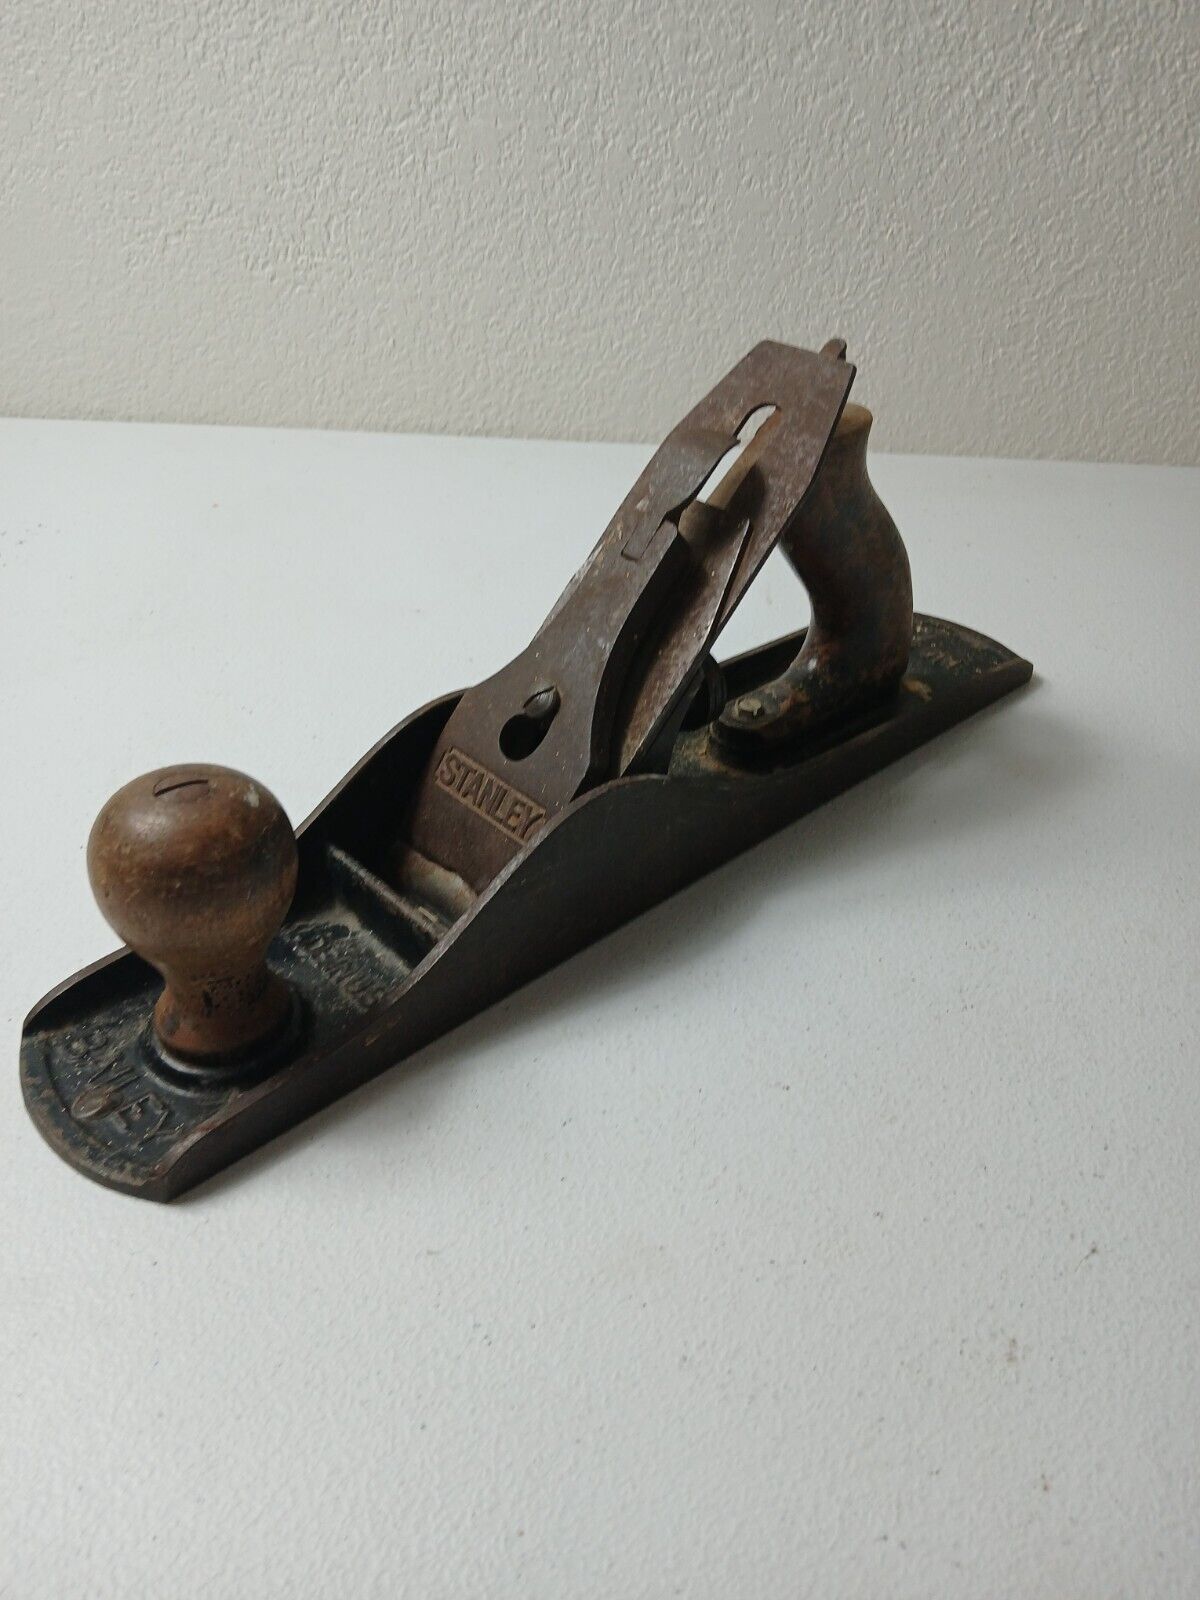 Vintage Stanley Bailey No. 5 Carpenters Smooth Plane Carpentry Tool Made in USA